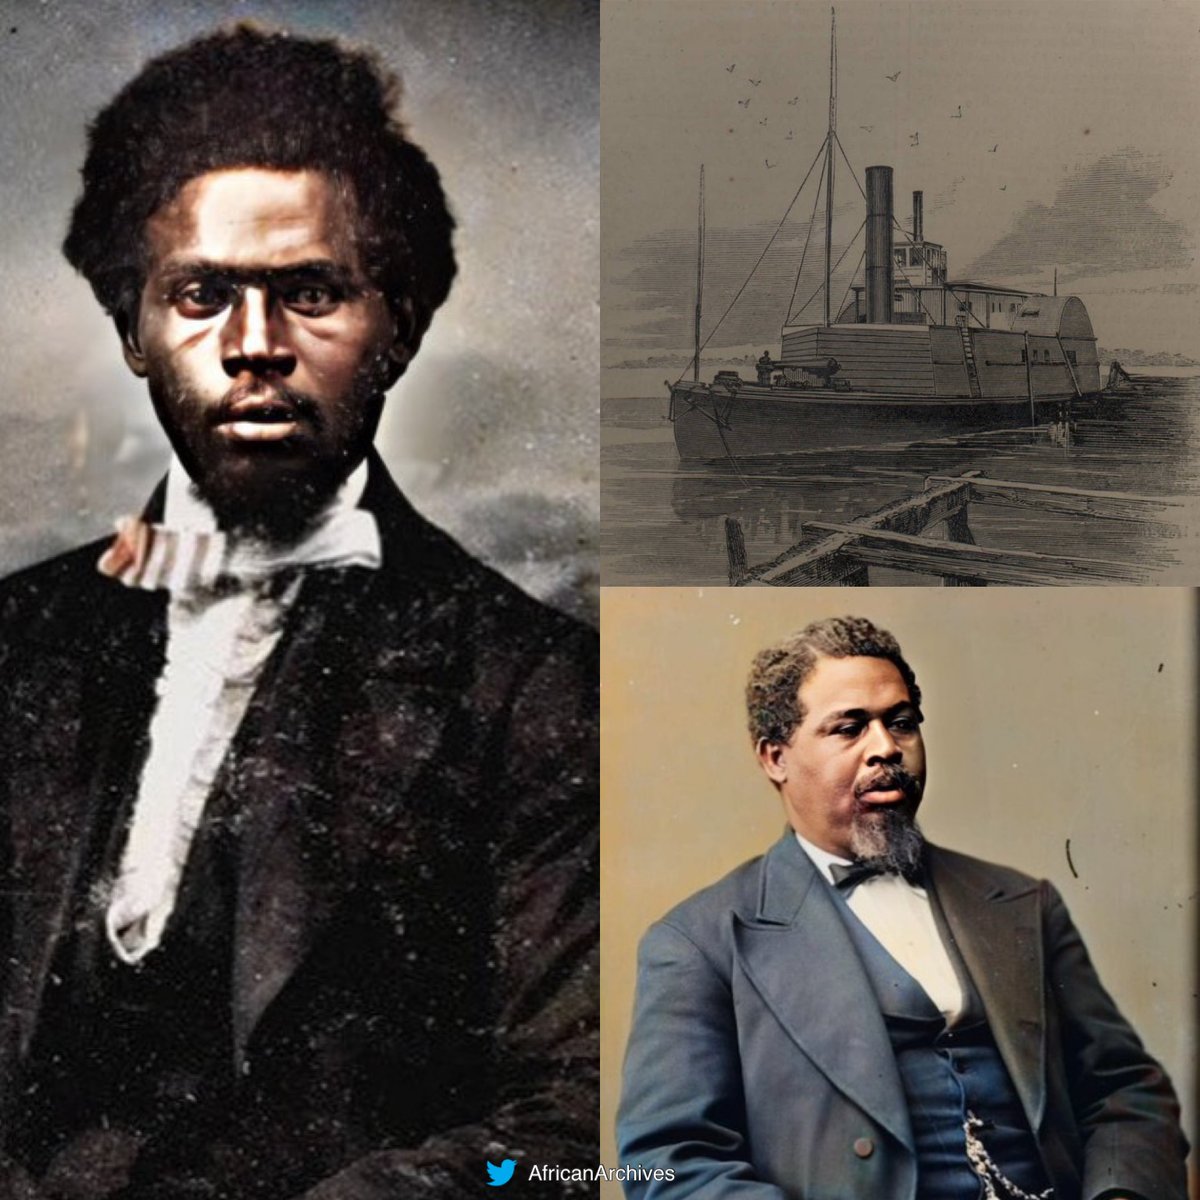 On this day in 1862, Robert Smalls stole a Confederate Ship and sailed it to Freedom disguised as a captain, freeing his crew and their families. A THREAD!